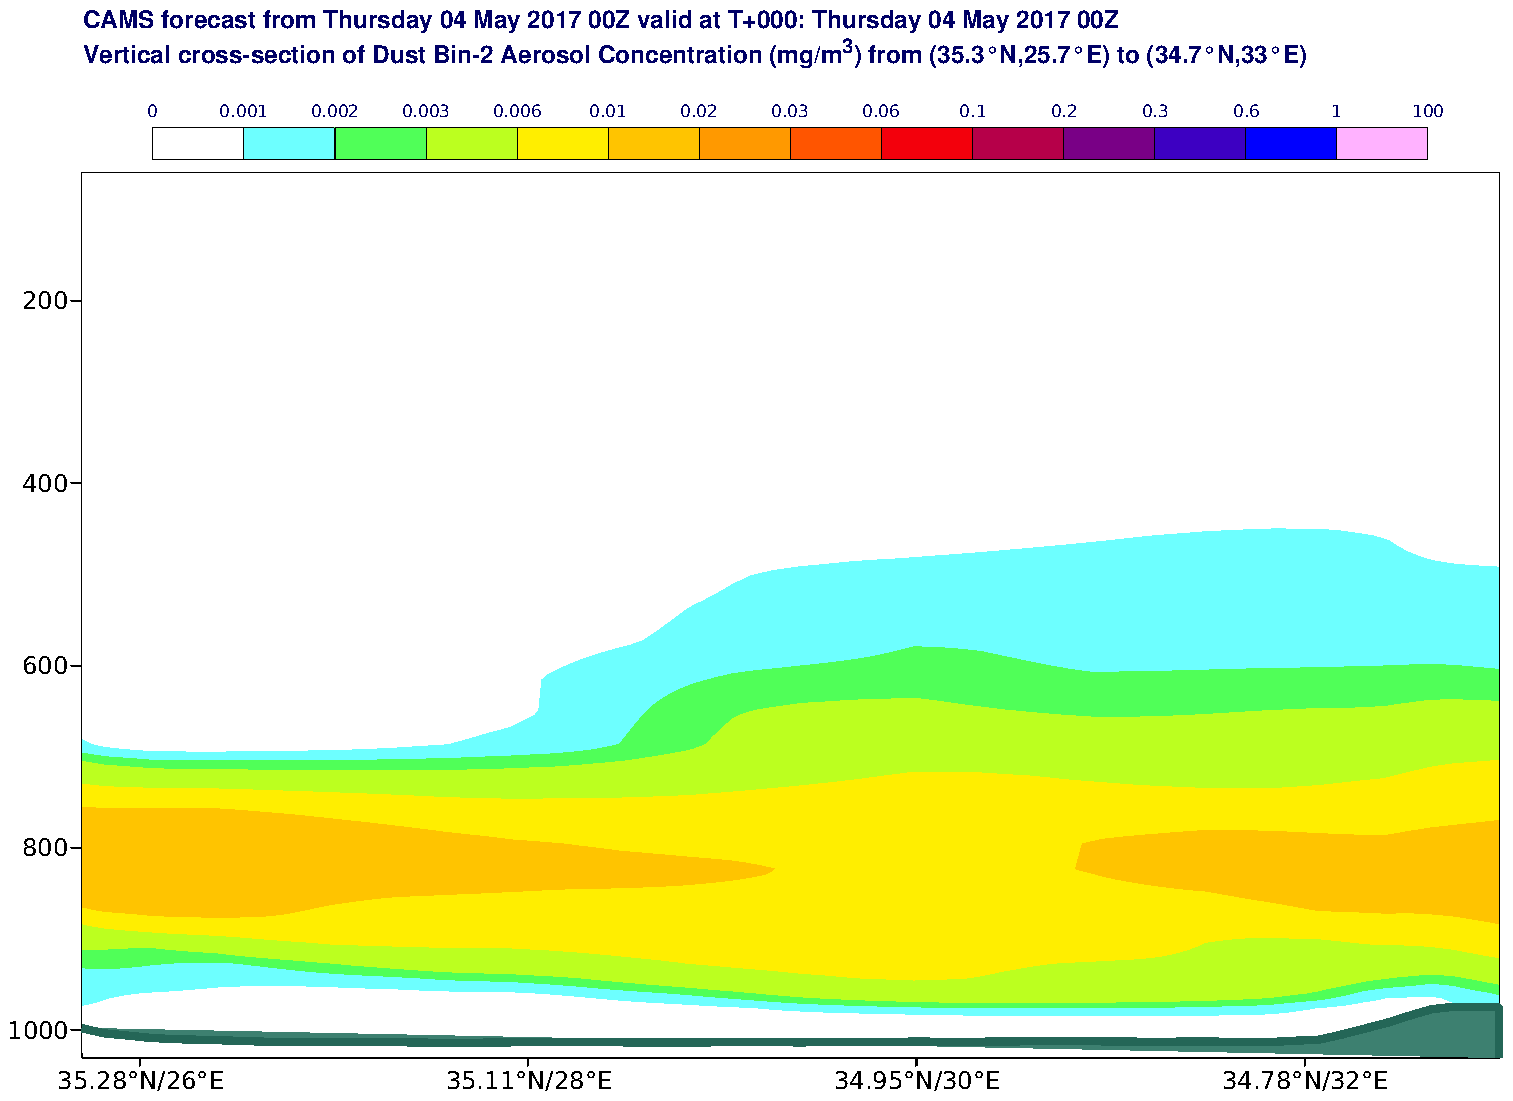 Vertical cross-section of Dust Bin-2 Aerosol Concentration (mg/m3) valid at T0 - 2017-05-04 00:00